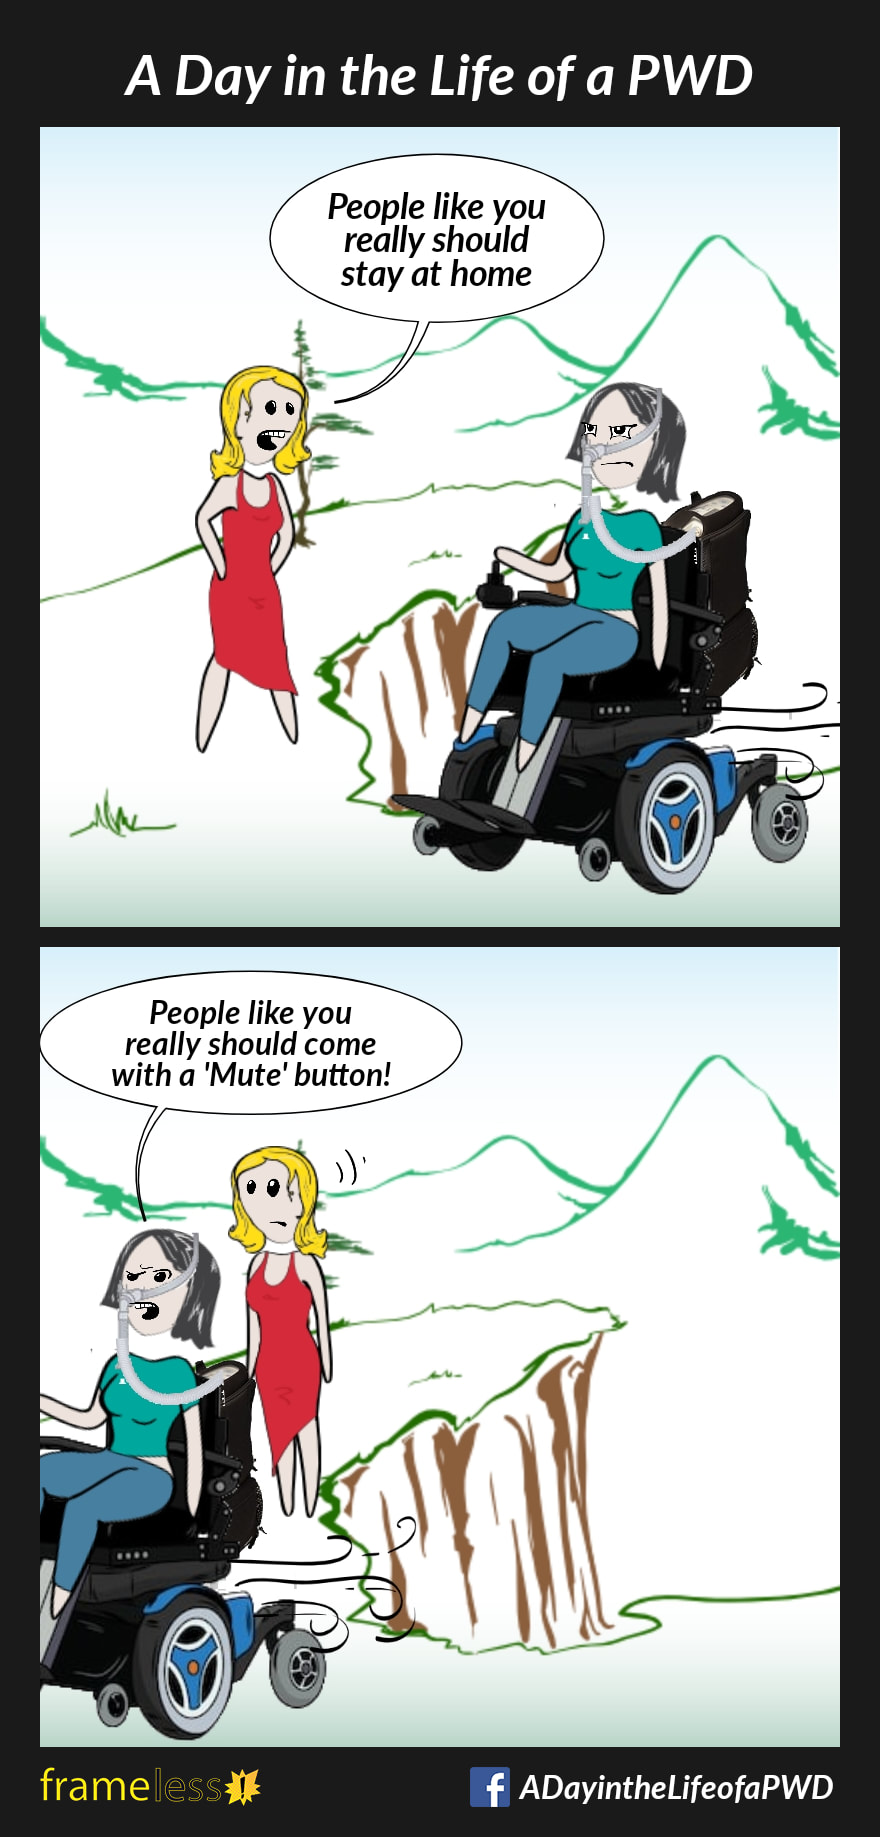 COMIC STRIP 
A Day in the Life of a PWD (Person With a Disability) 

Frame 1:
A woman wearing a nasal mask attached to a tube that leads to a bag on the back of her power wheelchair travels through a park.
STRANGER: People like you really should stay at home.

Frame 2:
WOMAN: People like you really should come with a 'Mute' button!